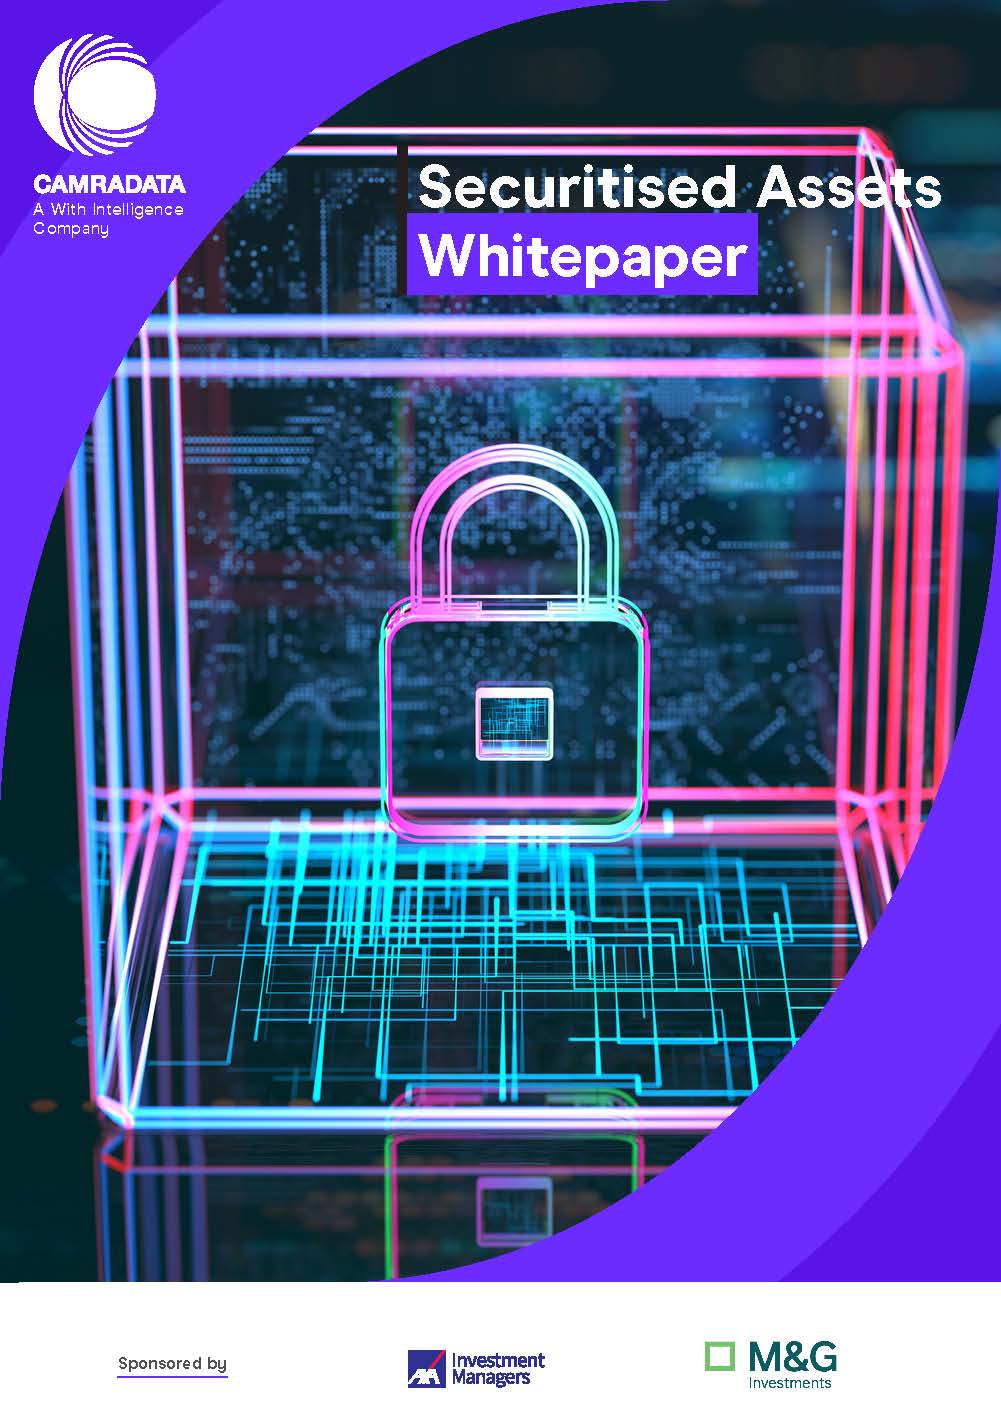 Securitised Assets Whitepaper